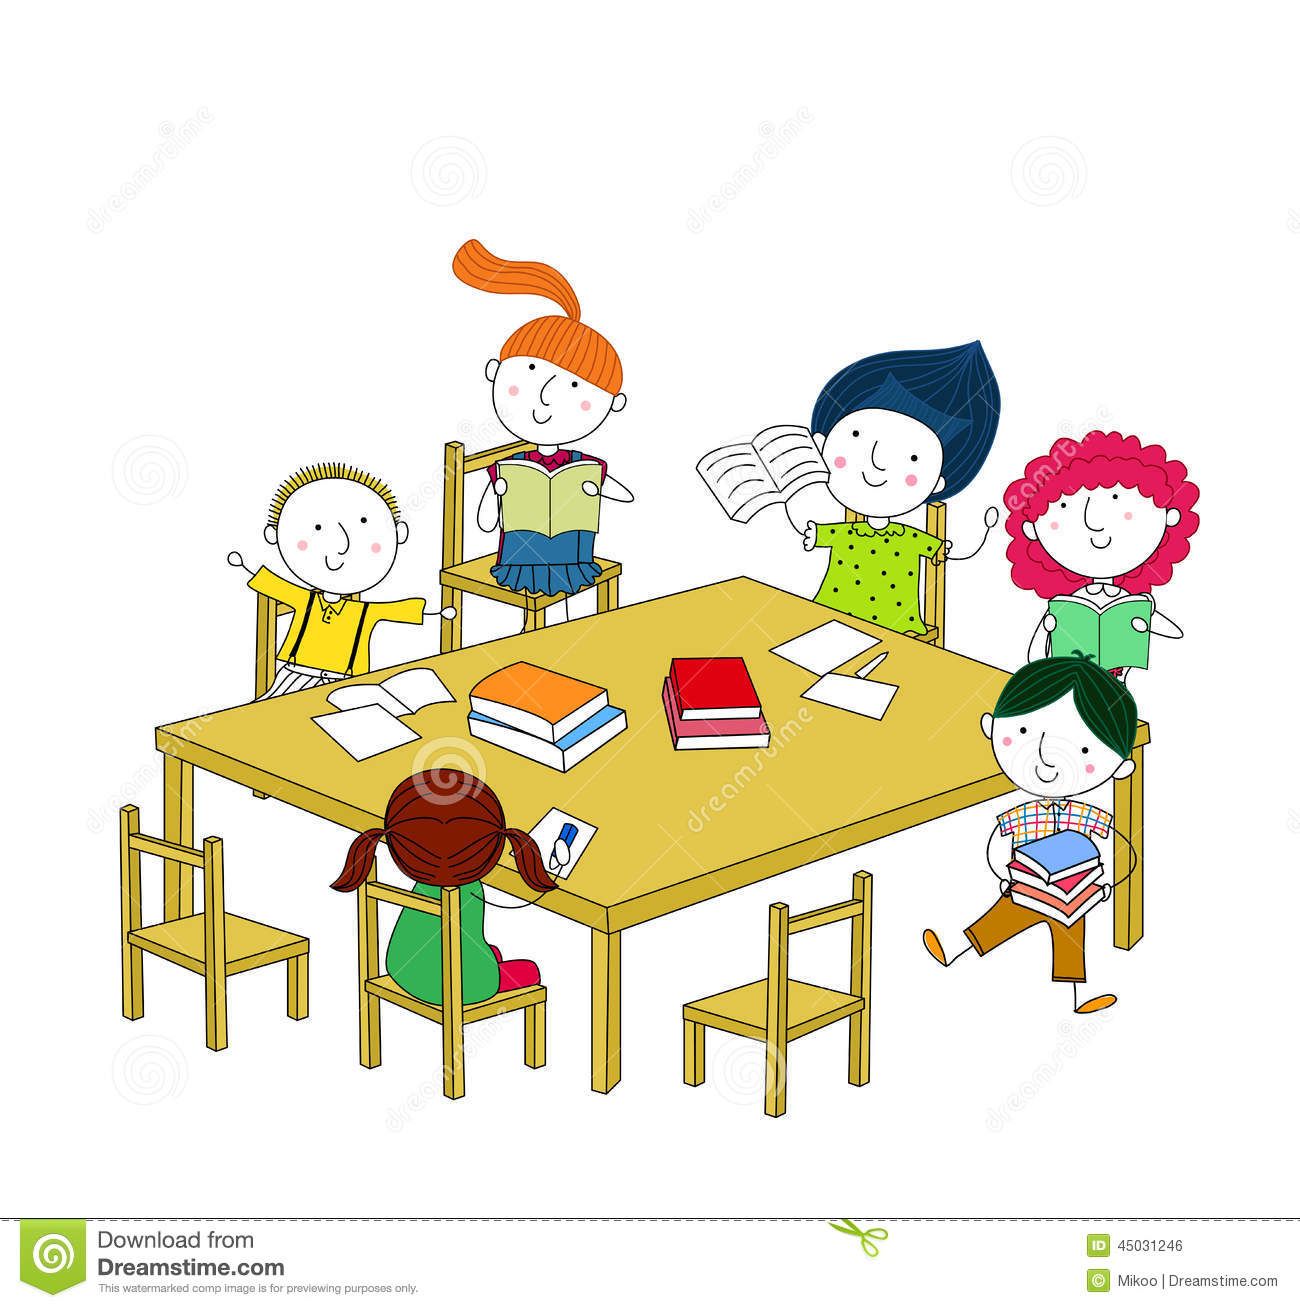 Kids sitting at table disracting others cartoon